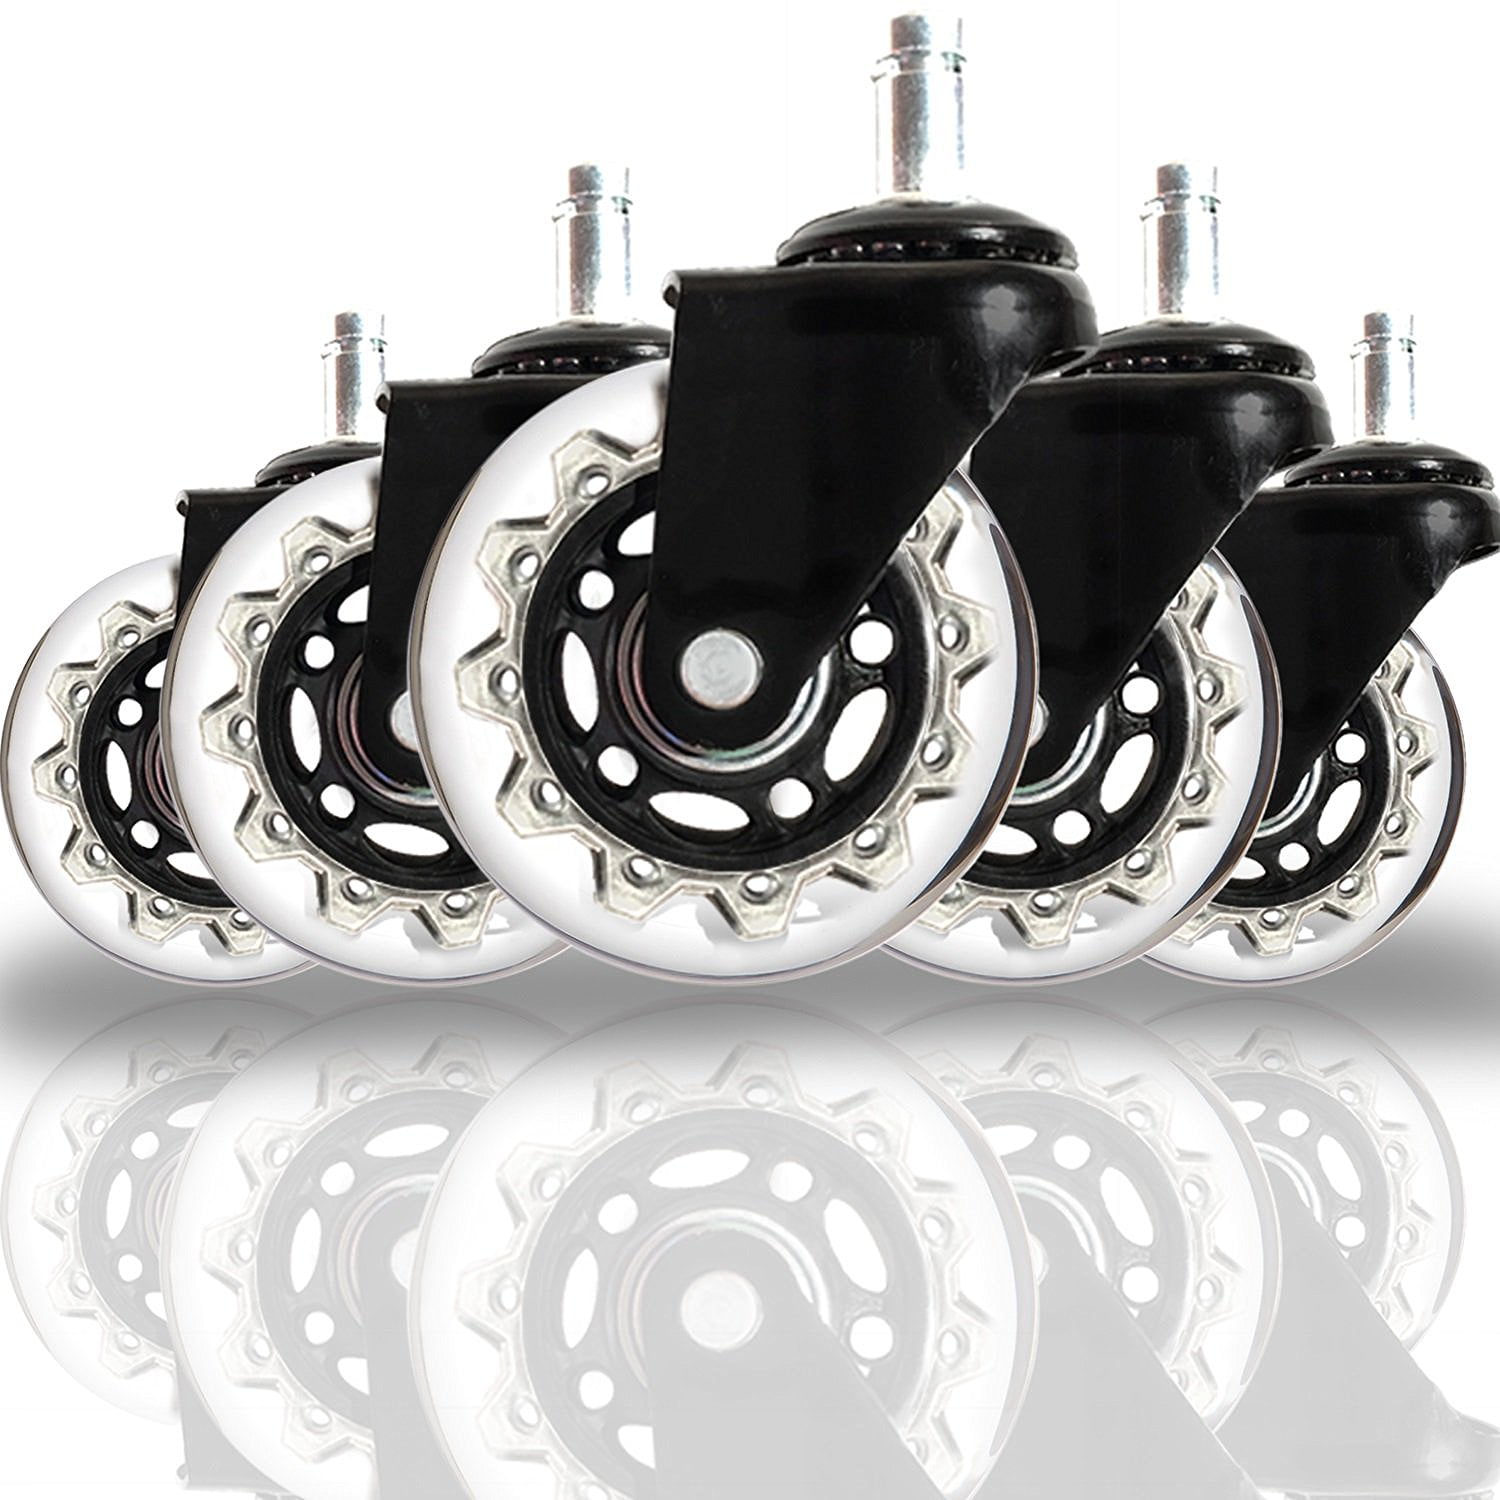 (Set of 5) 2.5" Rollerblade Office Chair Replacement